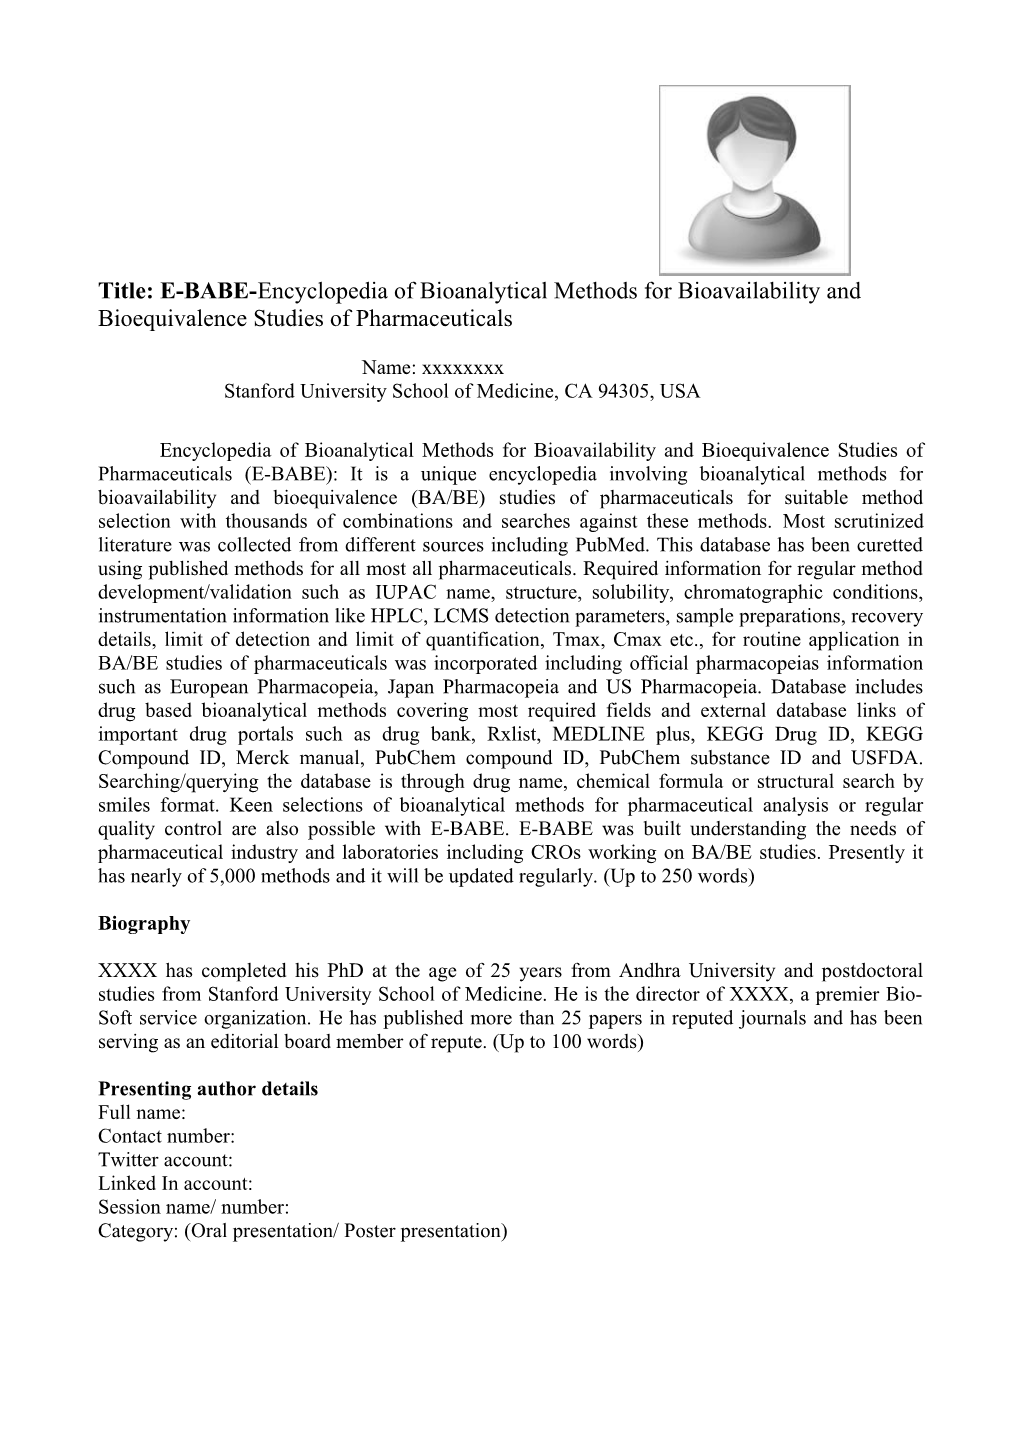 Title: E-BABE-Encyclopedia of Bioanalytical Methods for Bioavailability and Bioequivalence